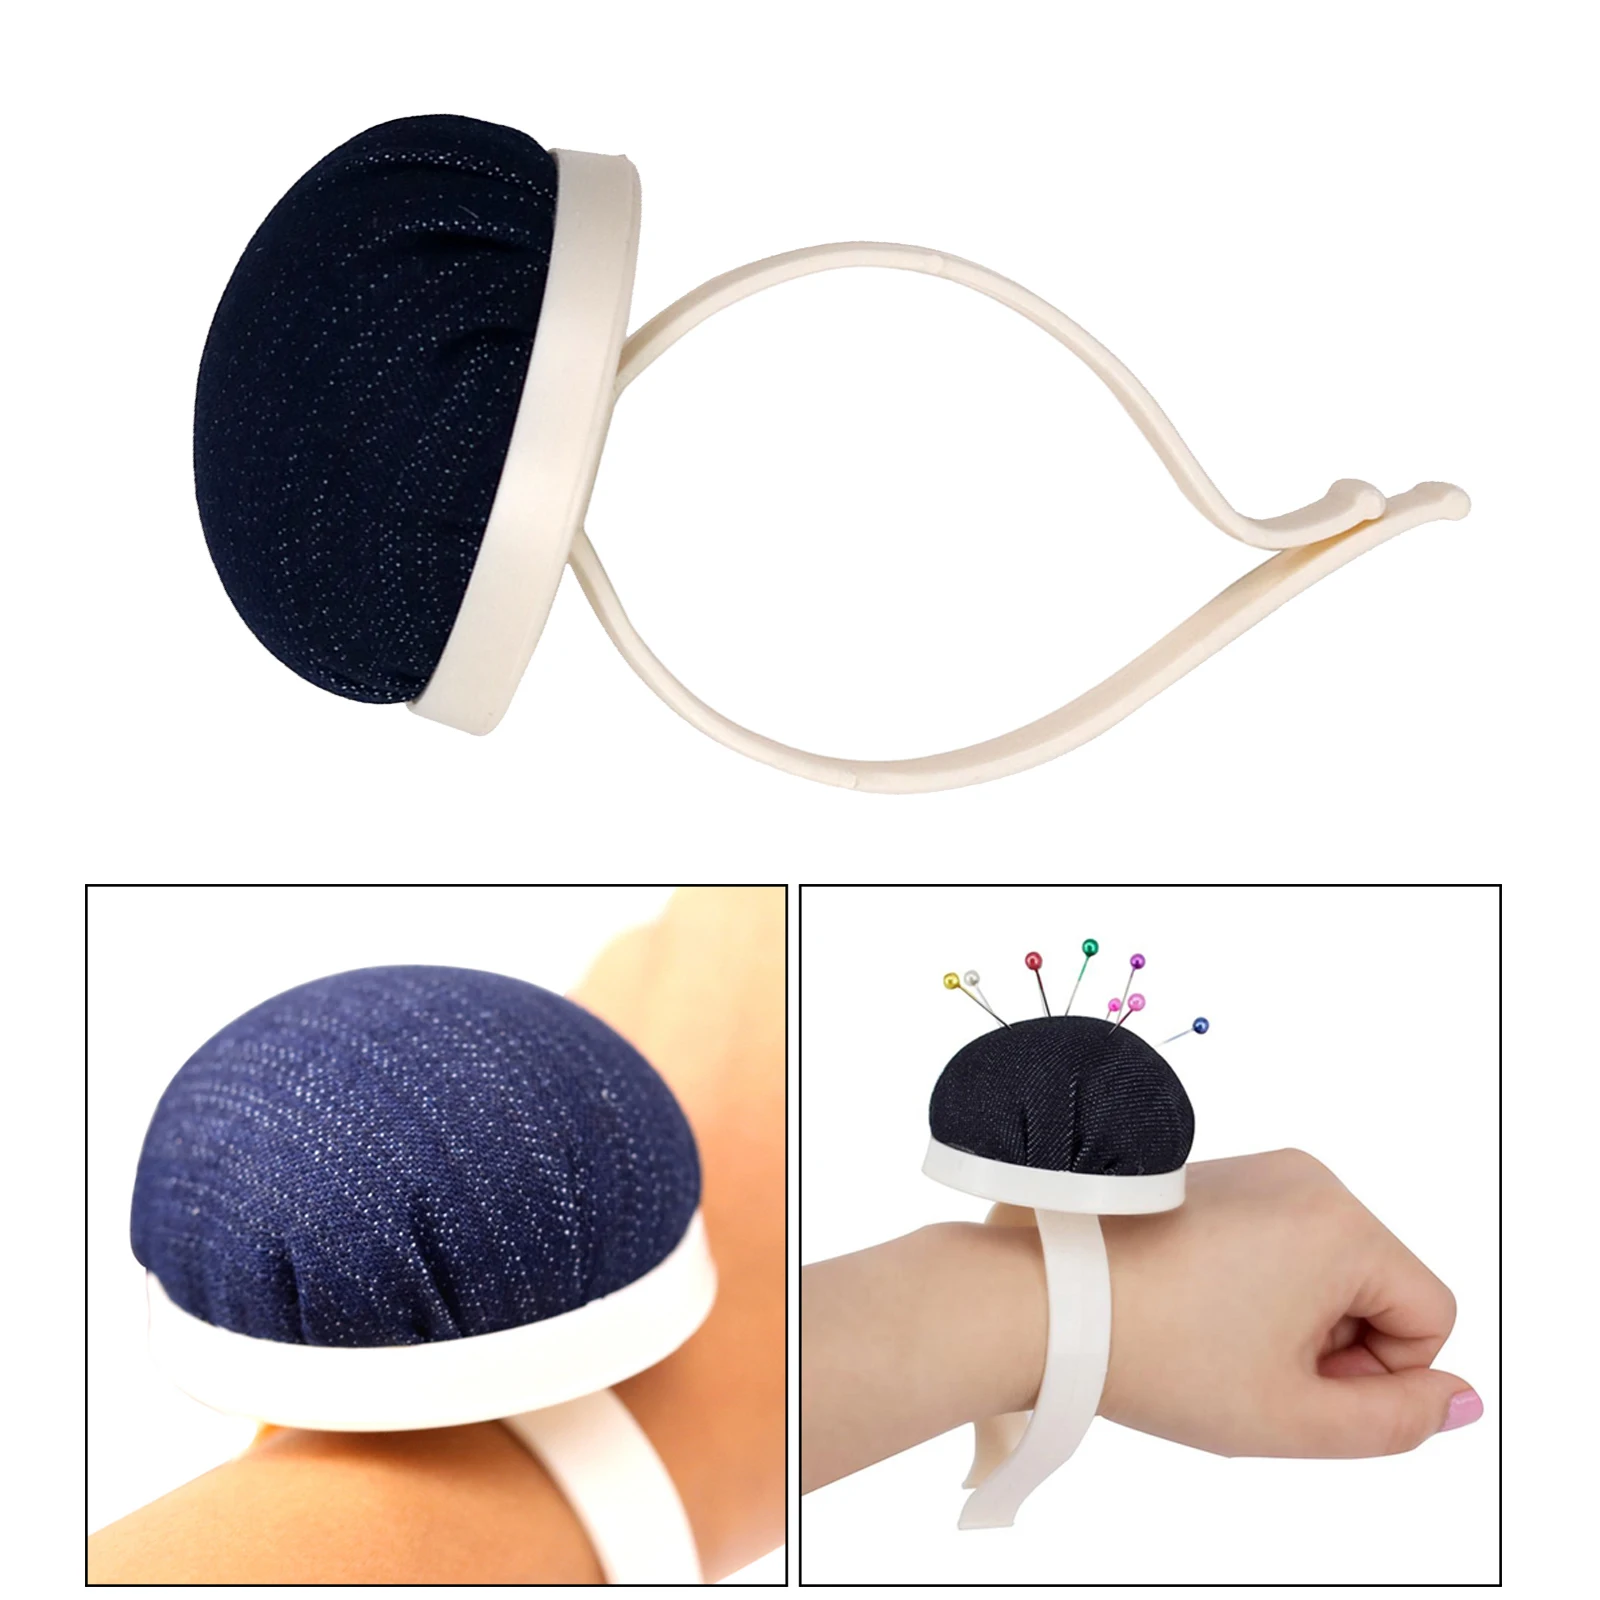 Plastic Wrist Wearable Pin Cushion (Cowboy) Sewing Needle Pincushions for Tailor Dressmaker Designer DIY Craft Sewing Accessory